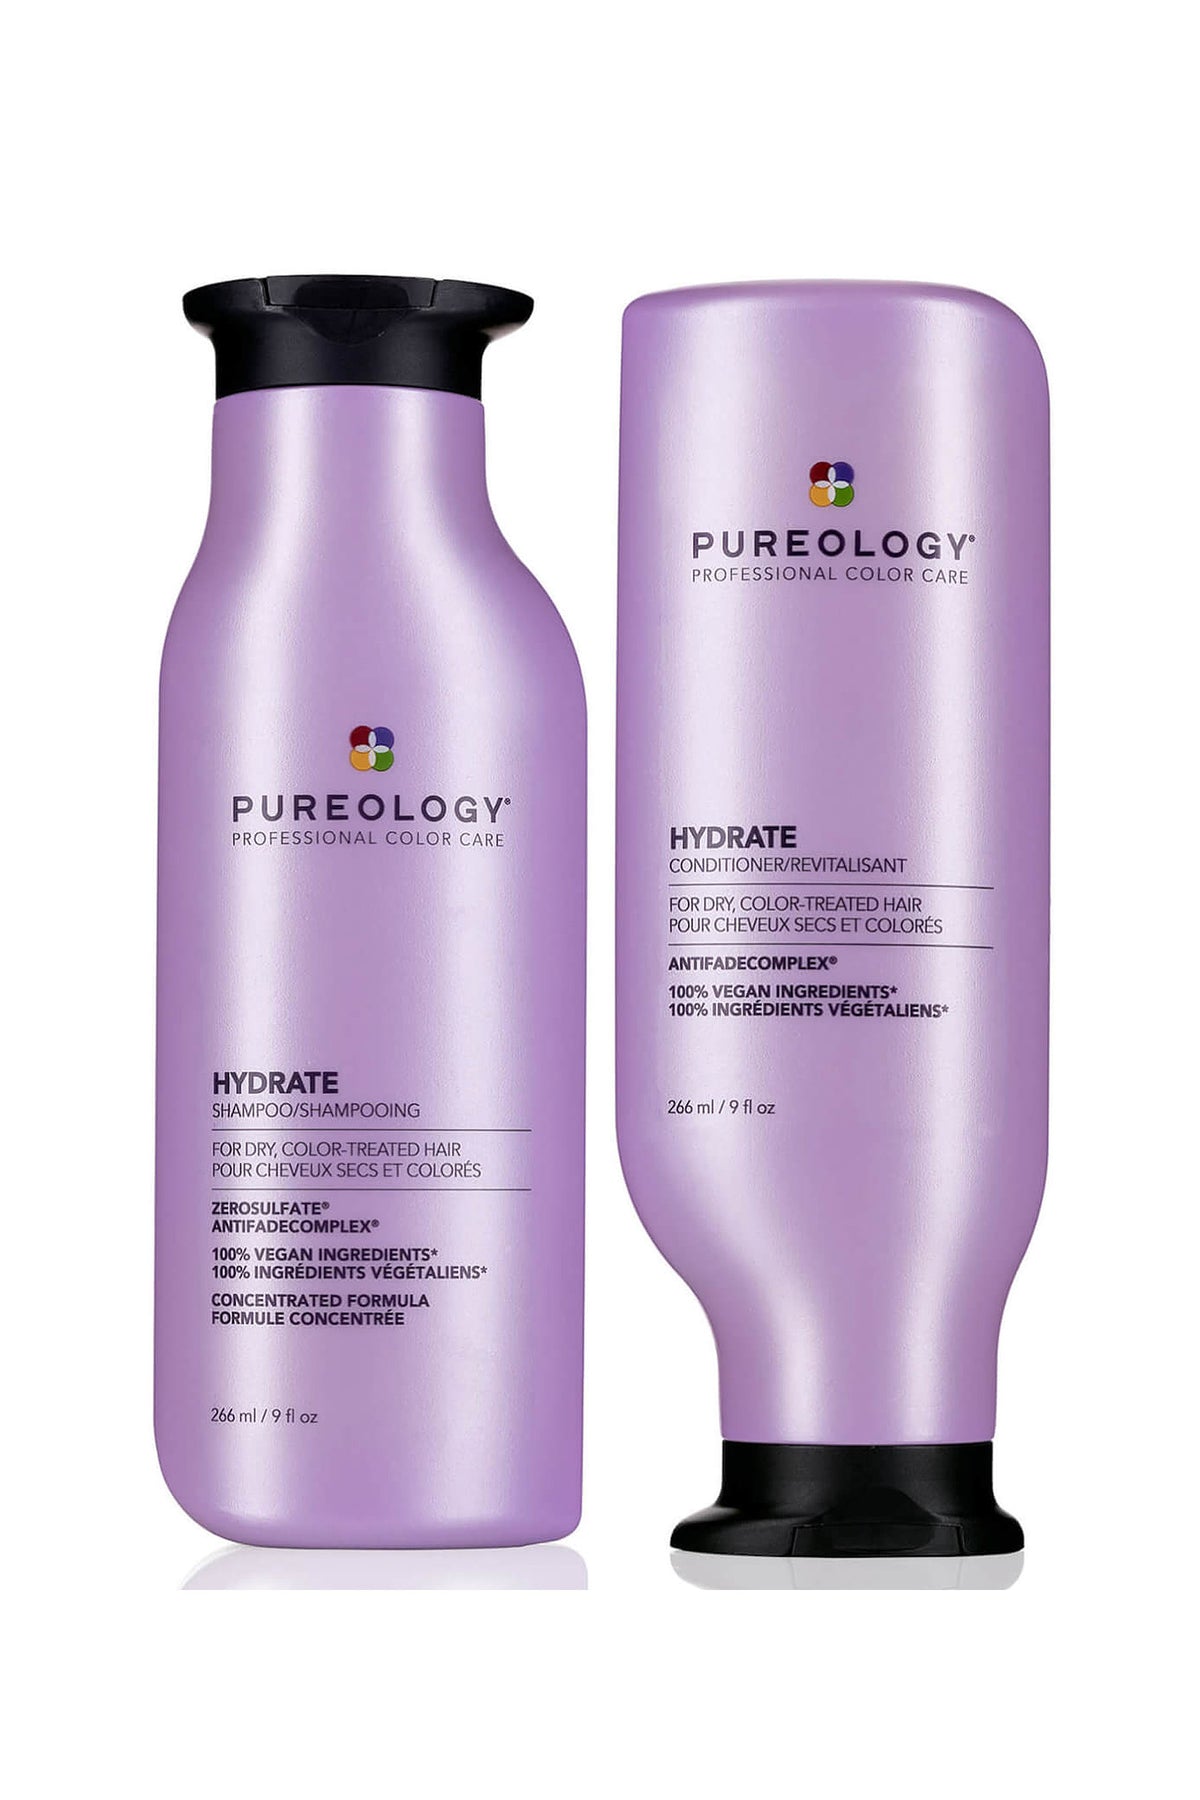 pureology hydrate shampoo and conditioner